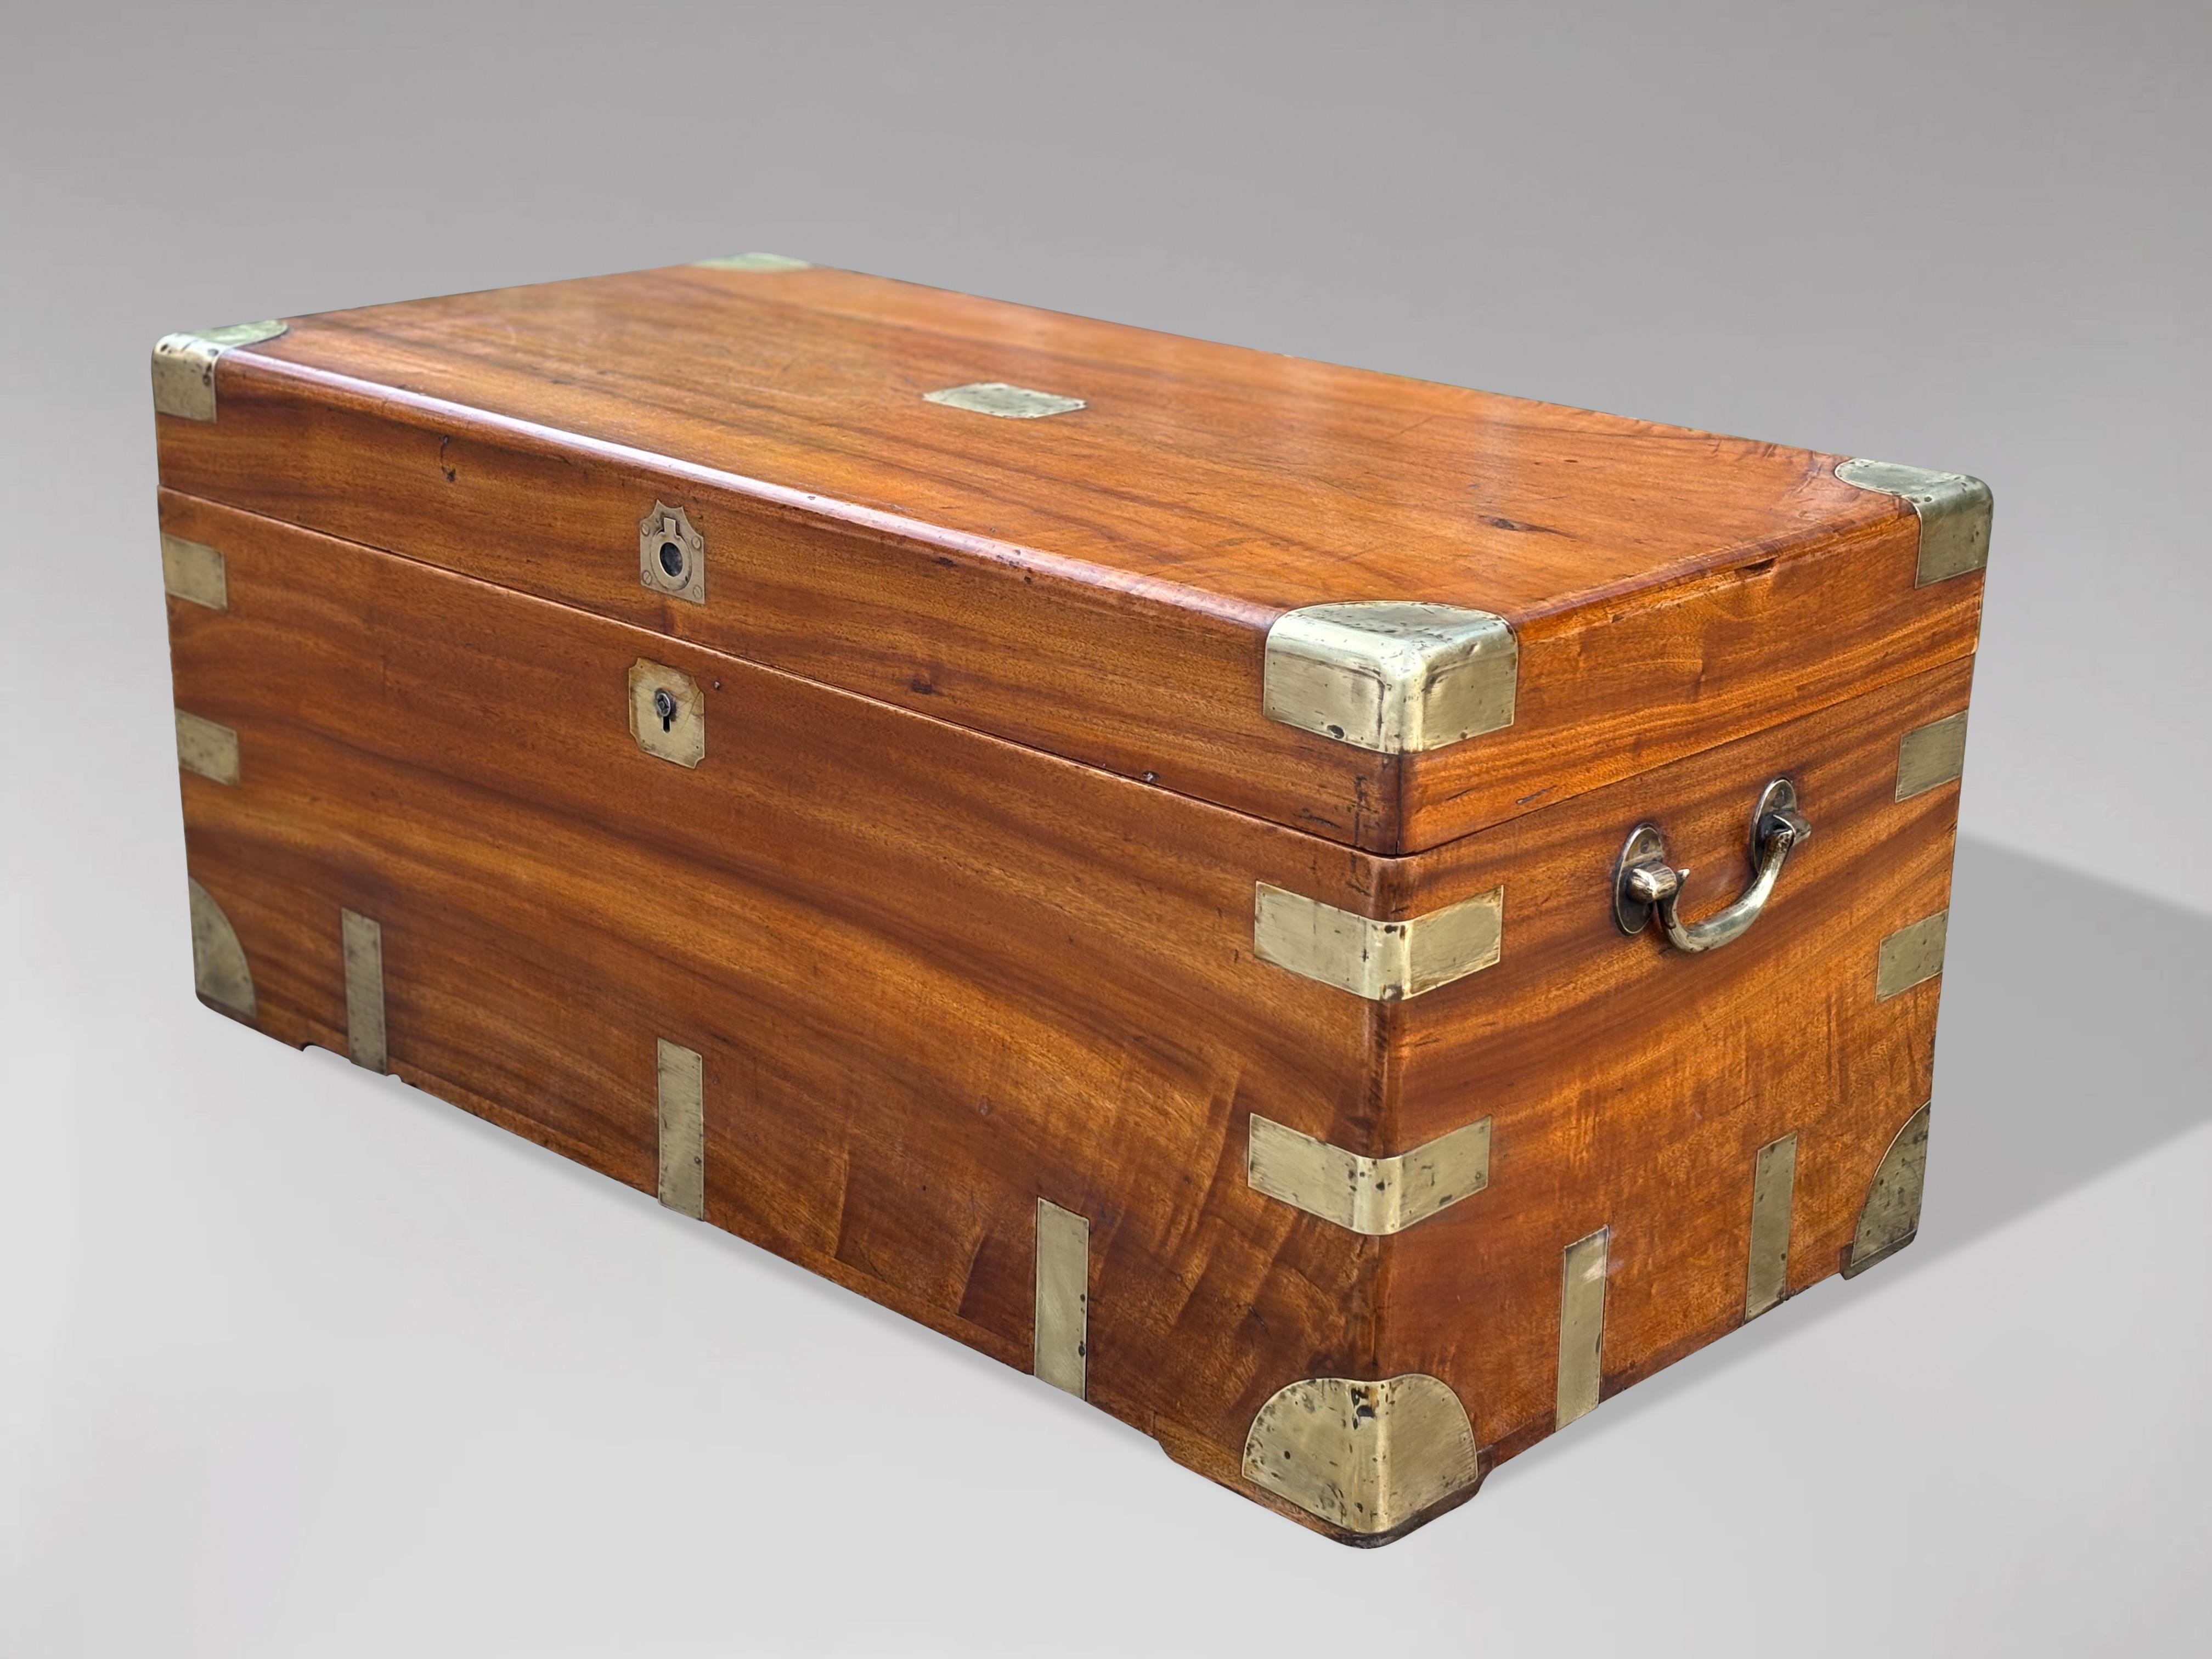 A large late 19th century camphor wood brass bound travelling chest or trunk with brass mounts and brass carrying handles. Warm rich colour and patina. Could be used as a super looking decorative coffee table. The very early timbers have a rich